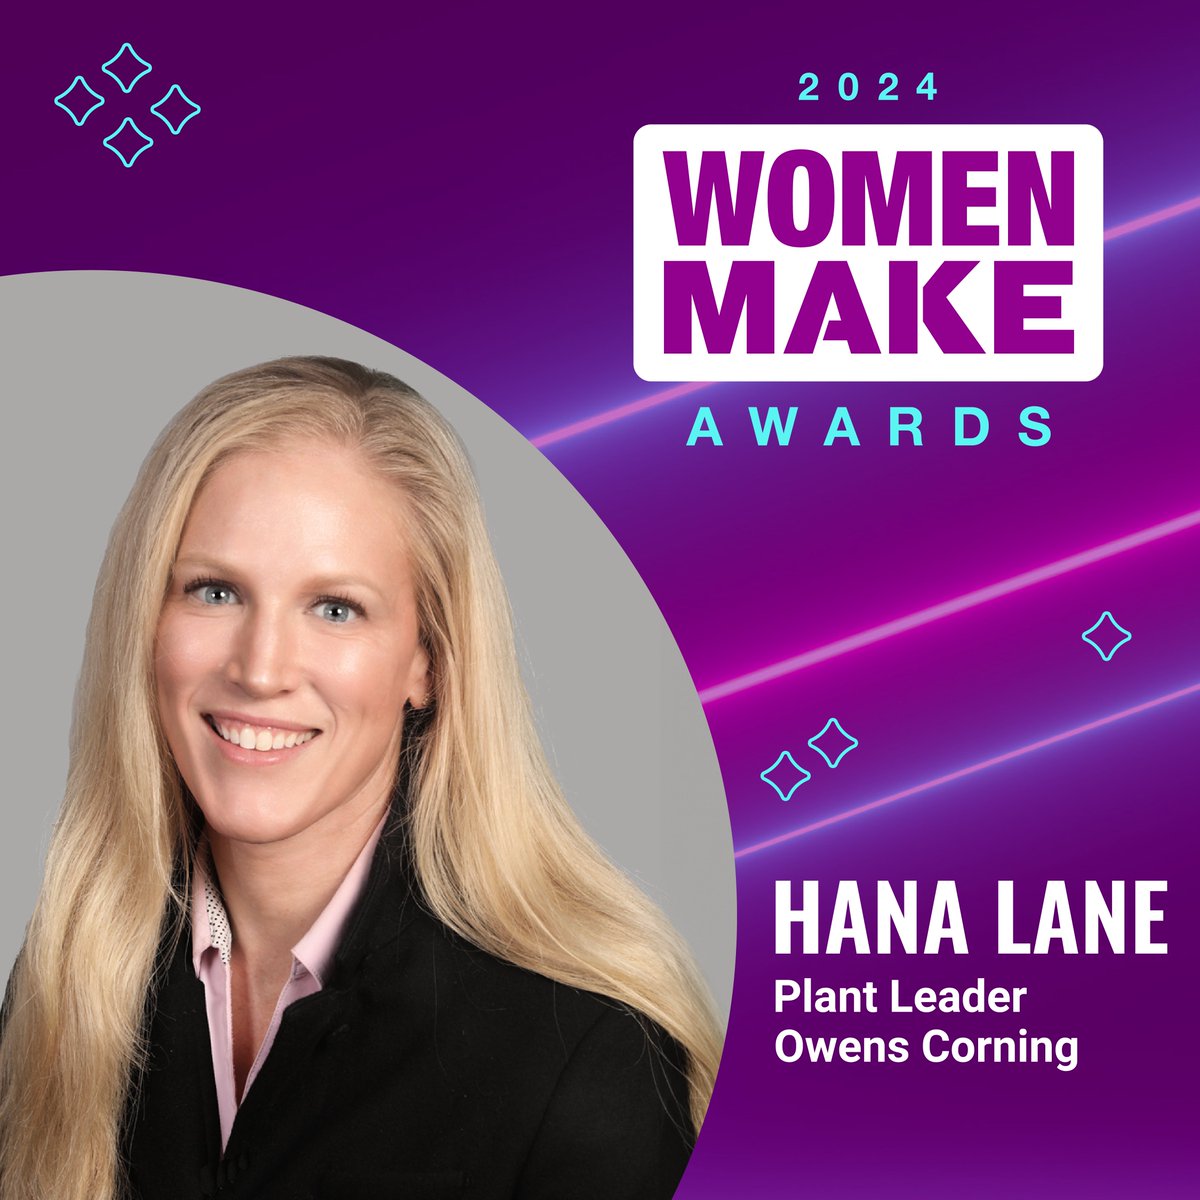 Celebration time! 🎉 Hana, our wonderful Roofing Plant Leader, is a 2024 Women MAKE Awards honoree! Learn more about this award in the link below. Hats off to you, Hana! bit.ly/49Y9zaa #WeAreOwensCorning #MFGWomen @TheMfgInstitute